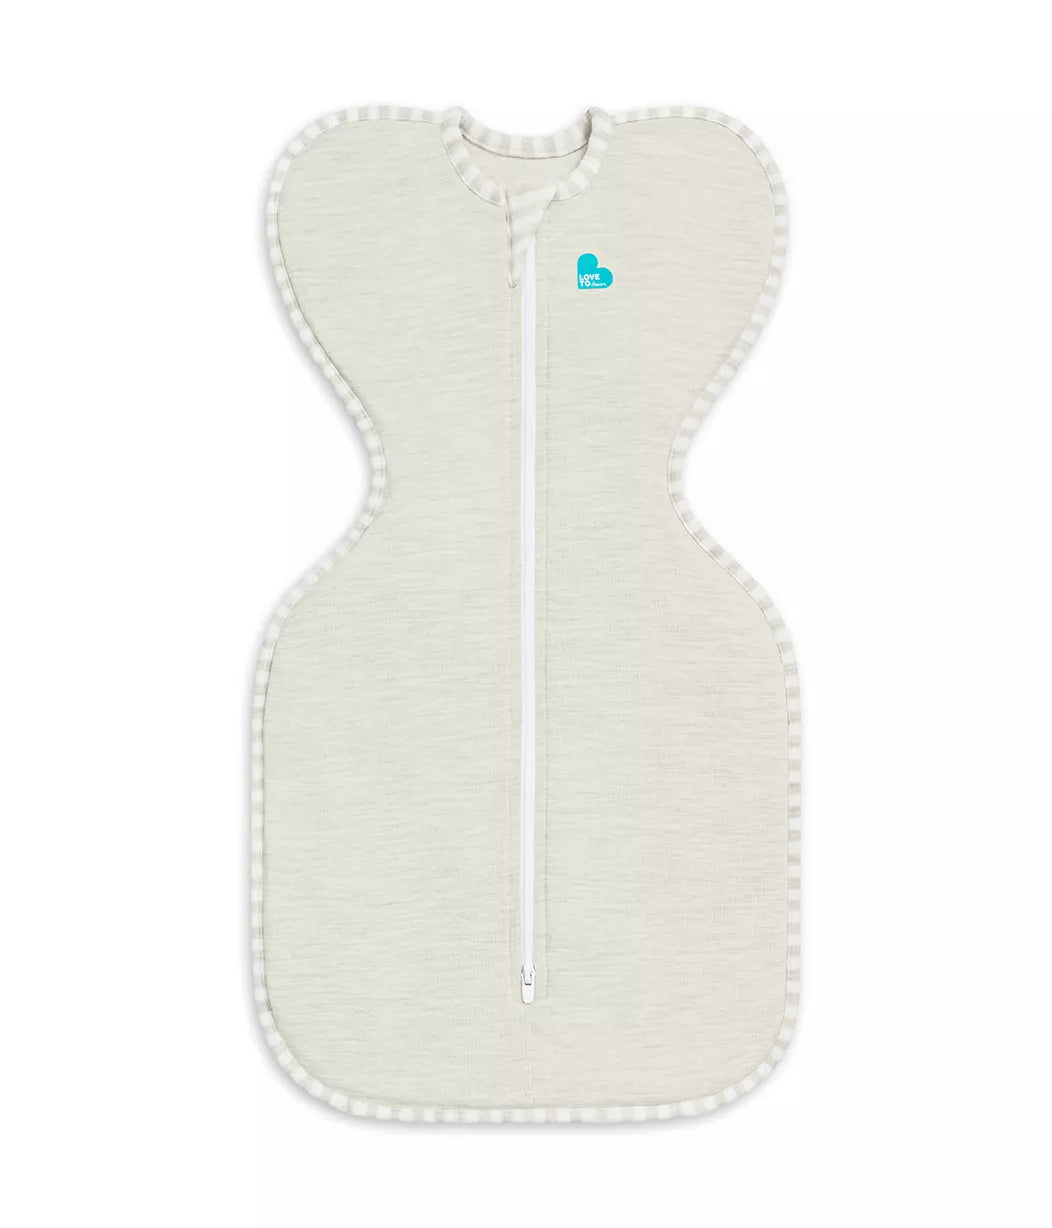 Love To Dream Swaddle Up Sleeping Bag - 1.0 TOG - Sand